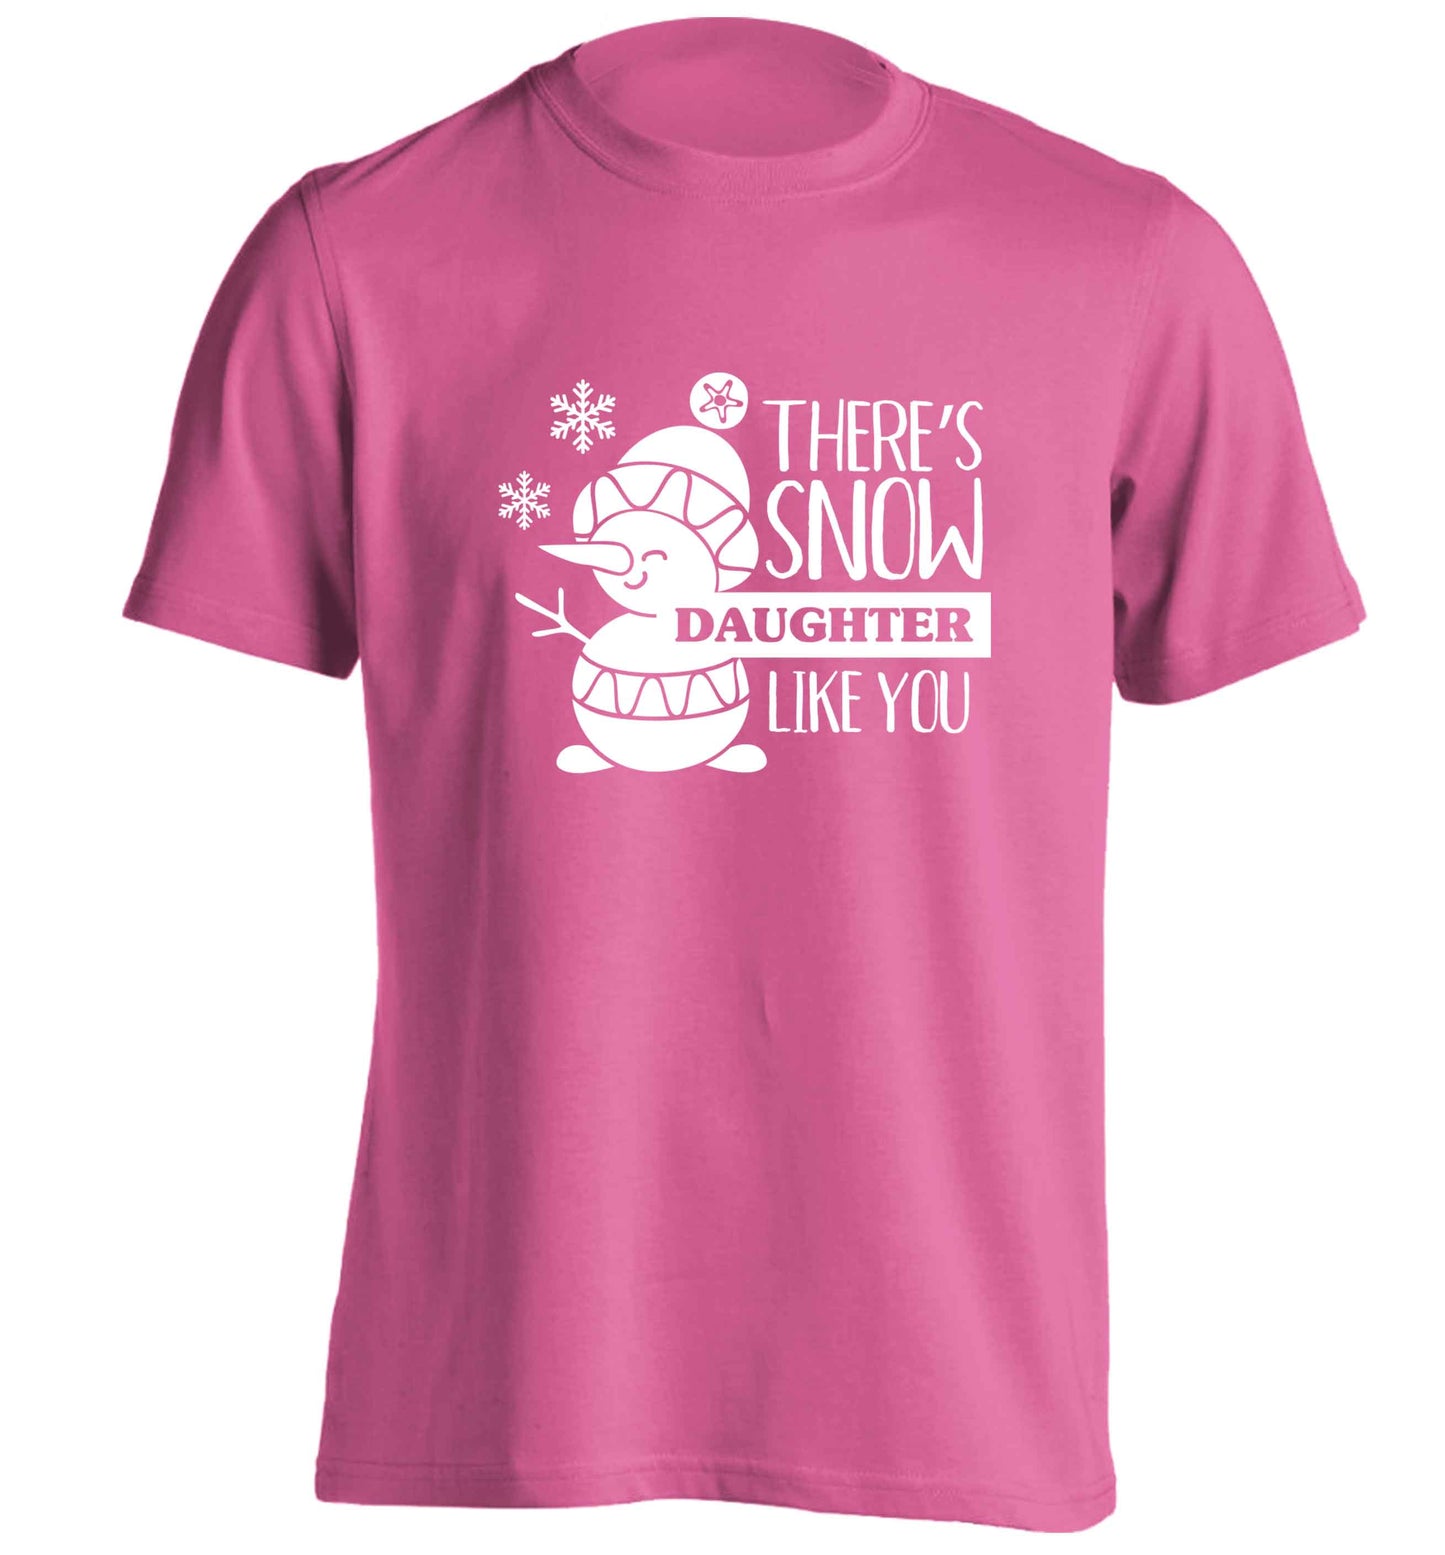 There's snow daughter like you adults unisex pink Tshirt 2XL